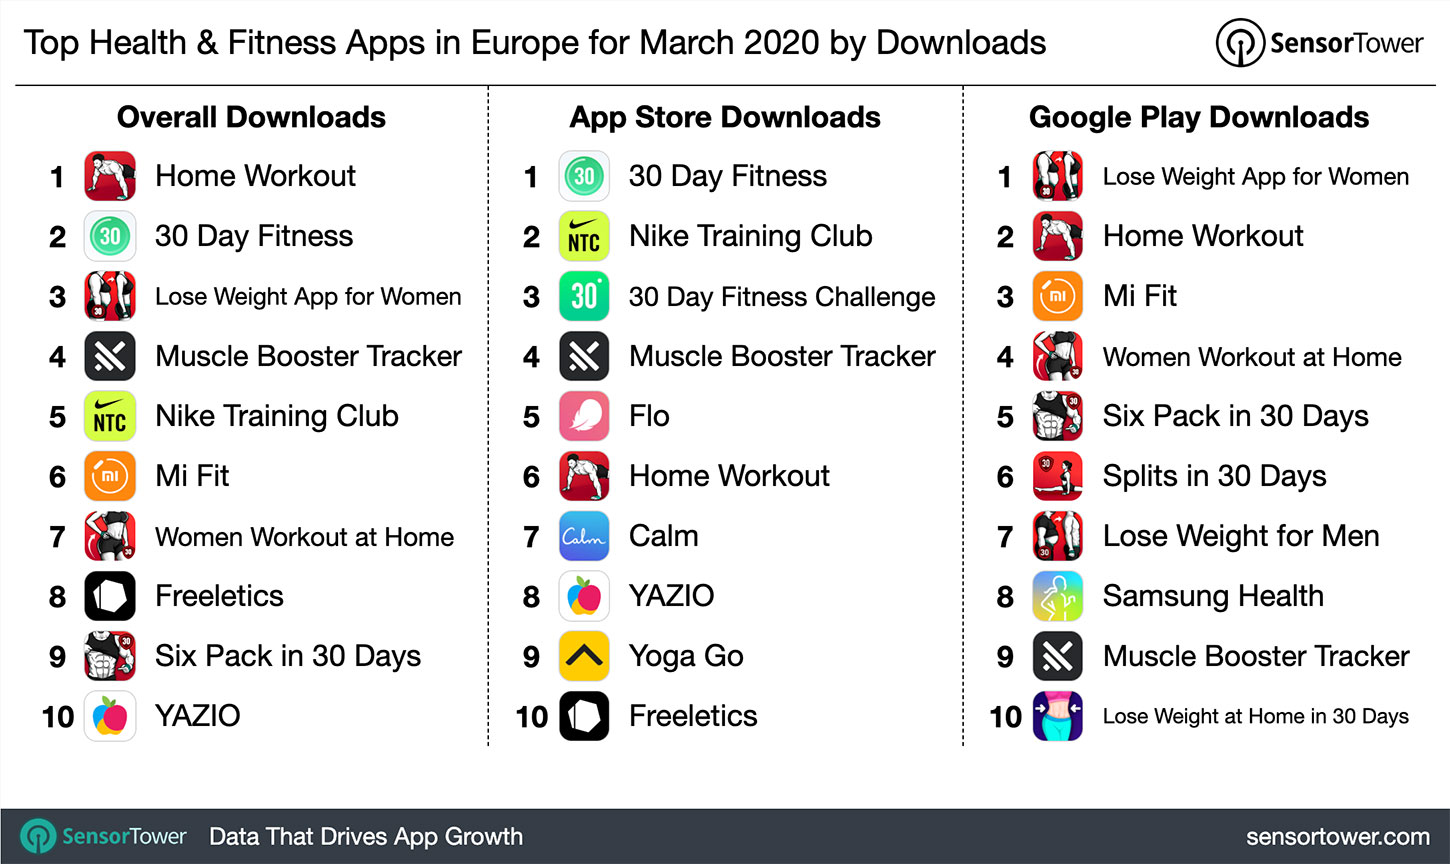 Top Health & Fitness Category Apps in Europe for March 2020 by